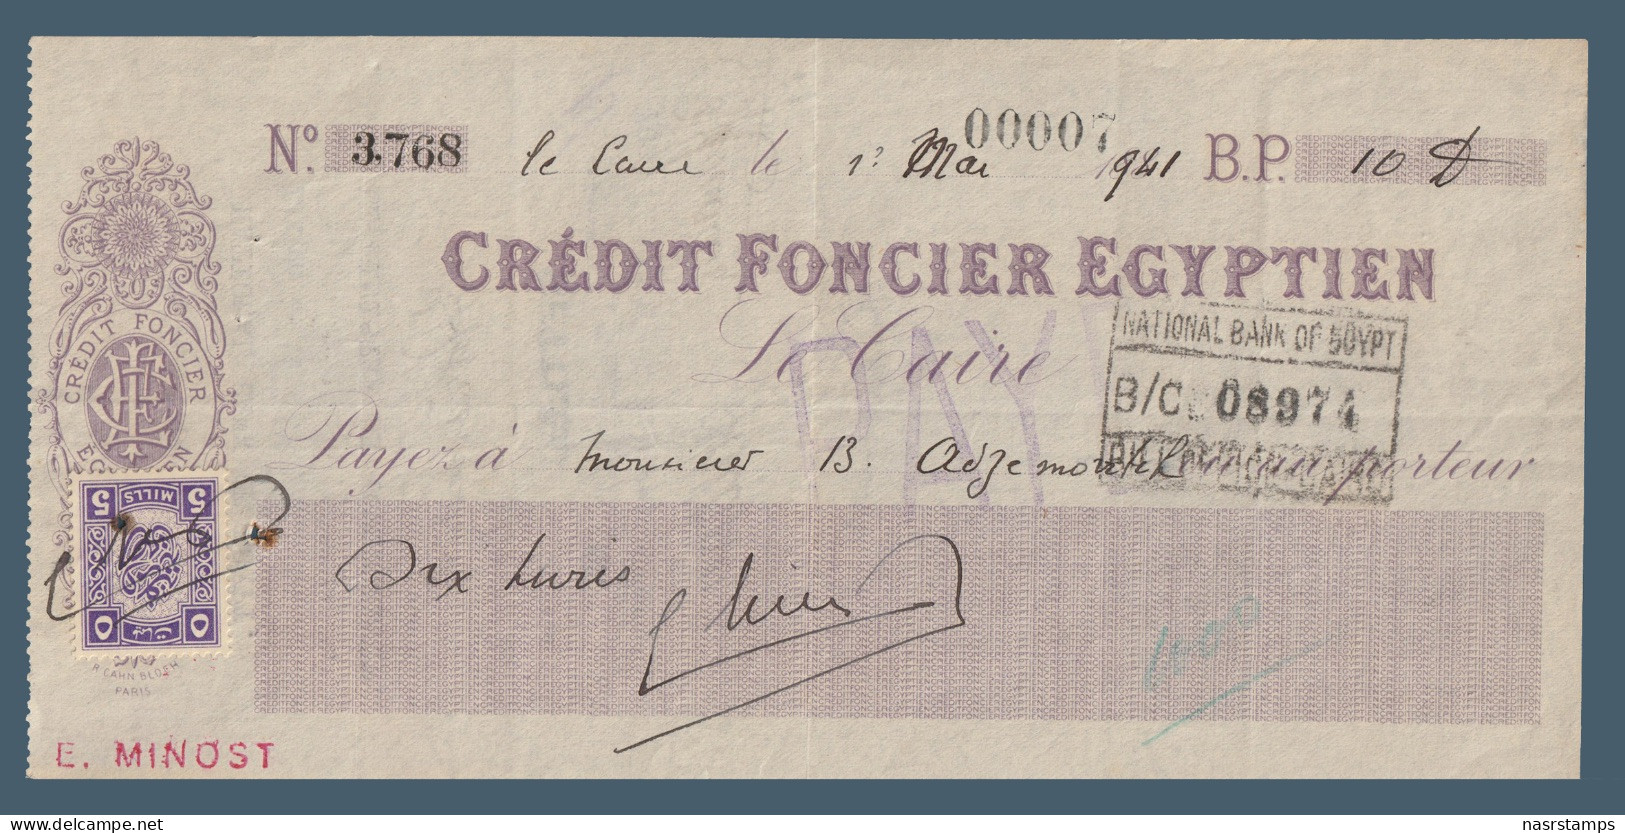 Egypt - 1941 - Vintage Check - ( Credit Foncier Egyptien - Cairo ) - Cheques & Traveler's Cheques